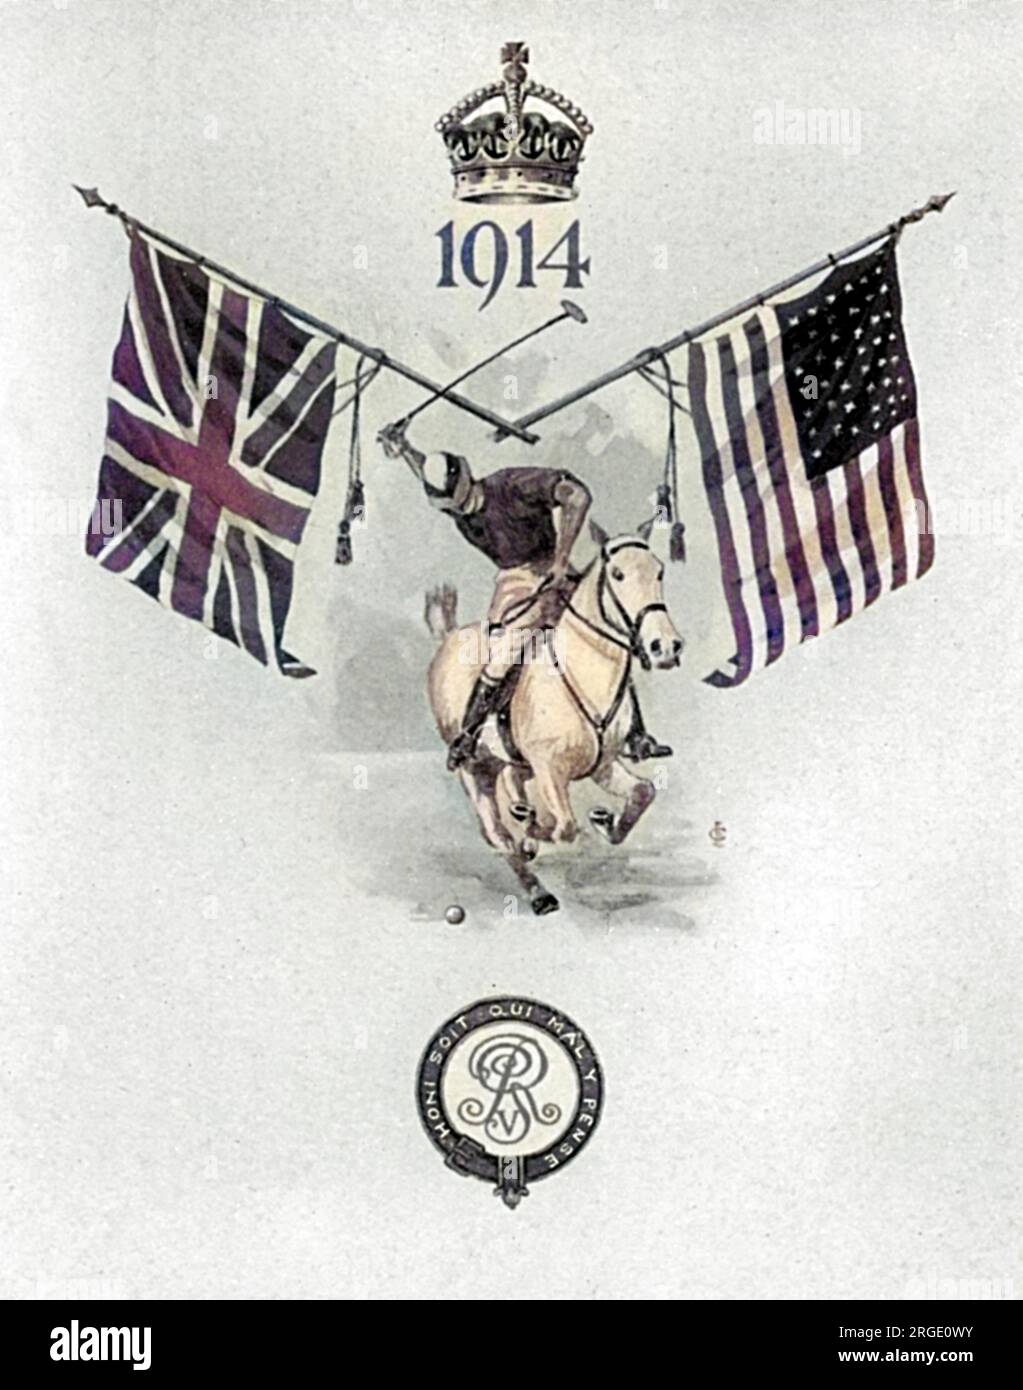 The menu card at the dinner given by King George V at Buckingham Palace to the England polo team after they had won the International Polo Trophy - or Westchester Cup - from America in 1914. Stock Photo